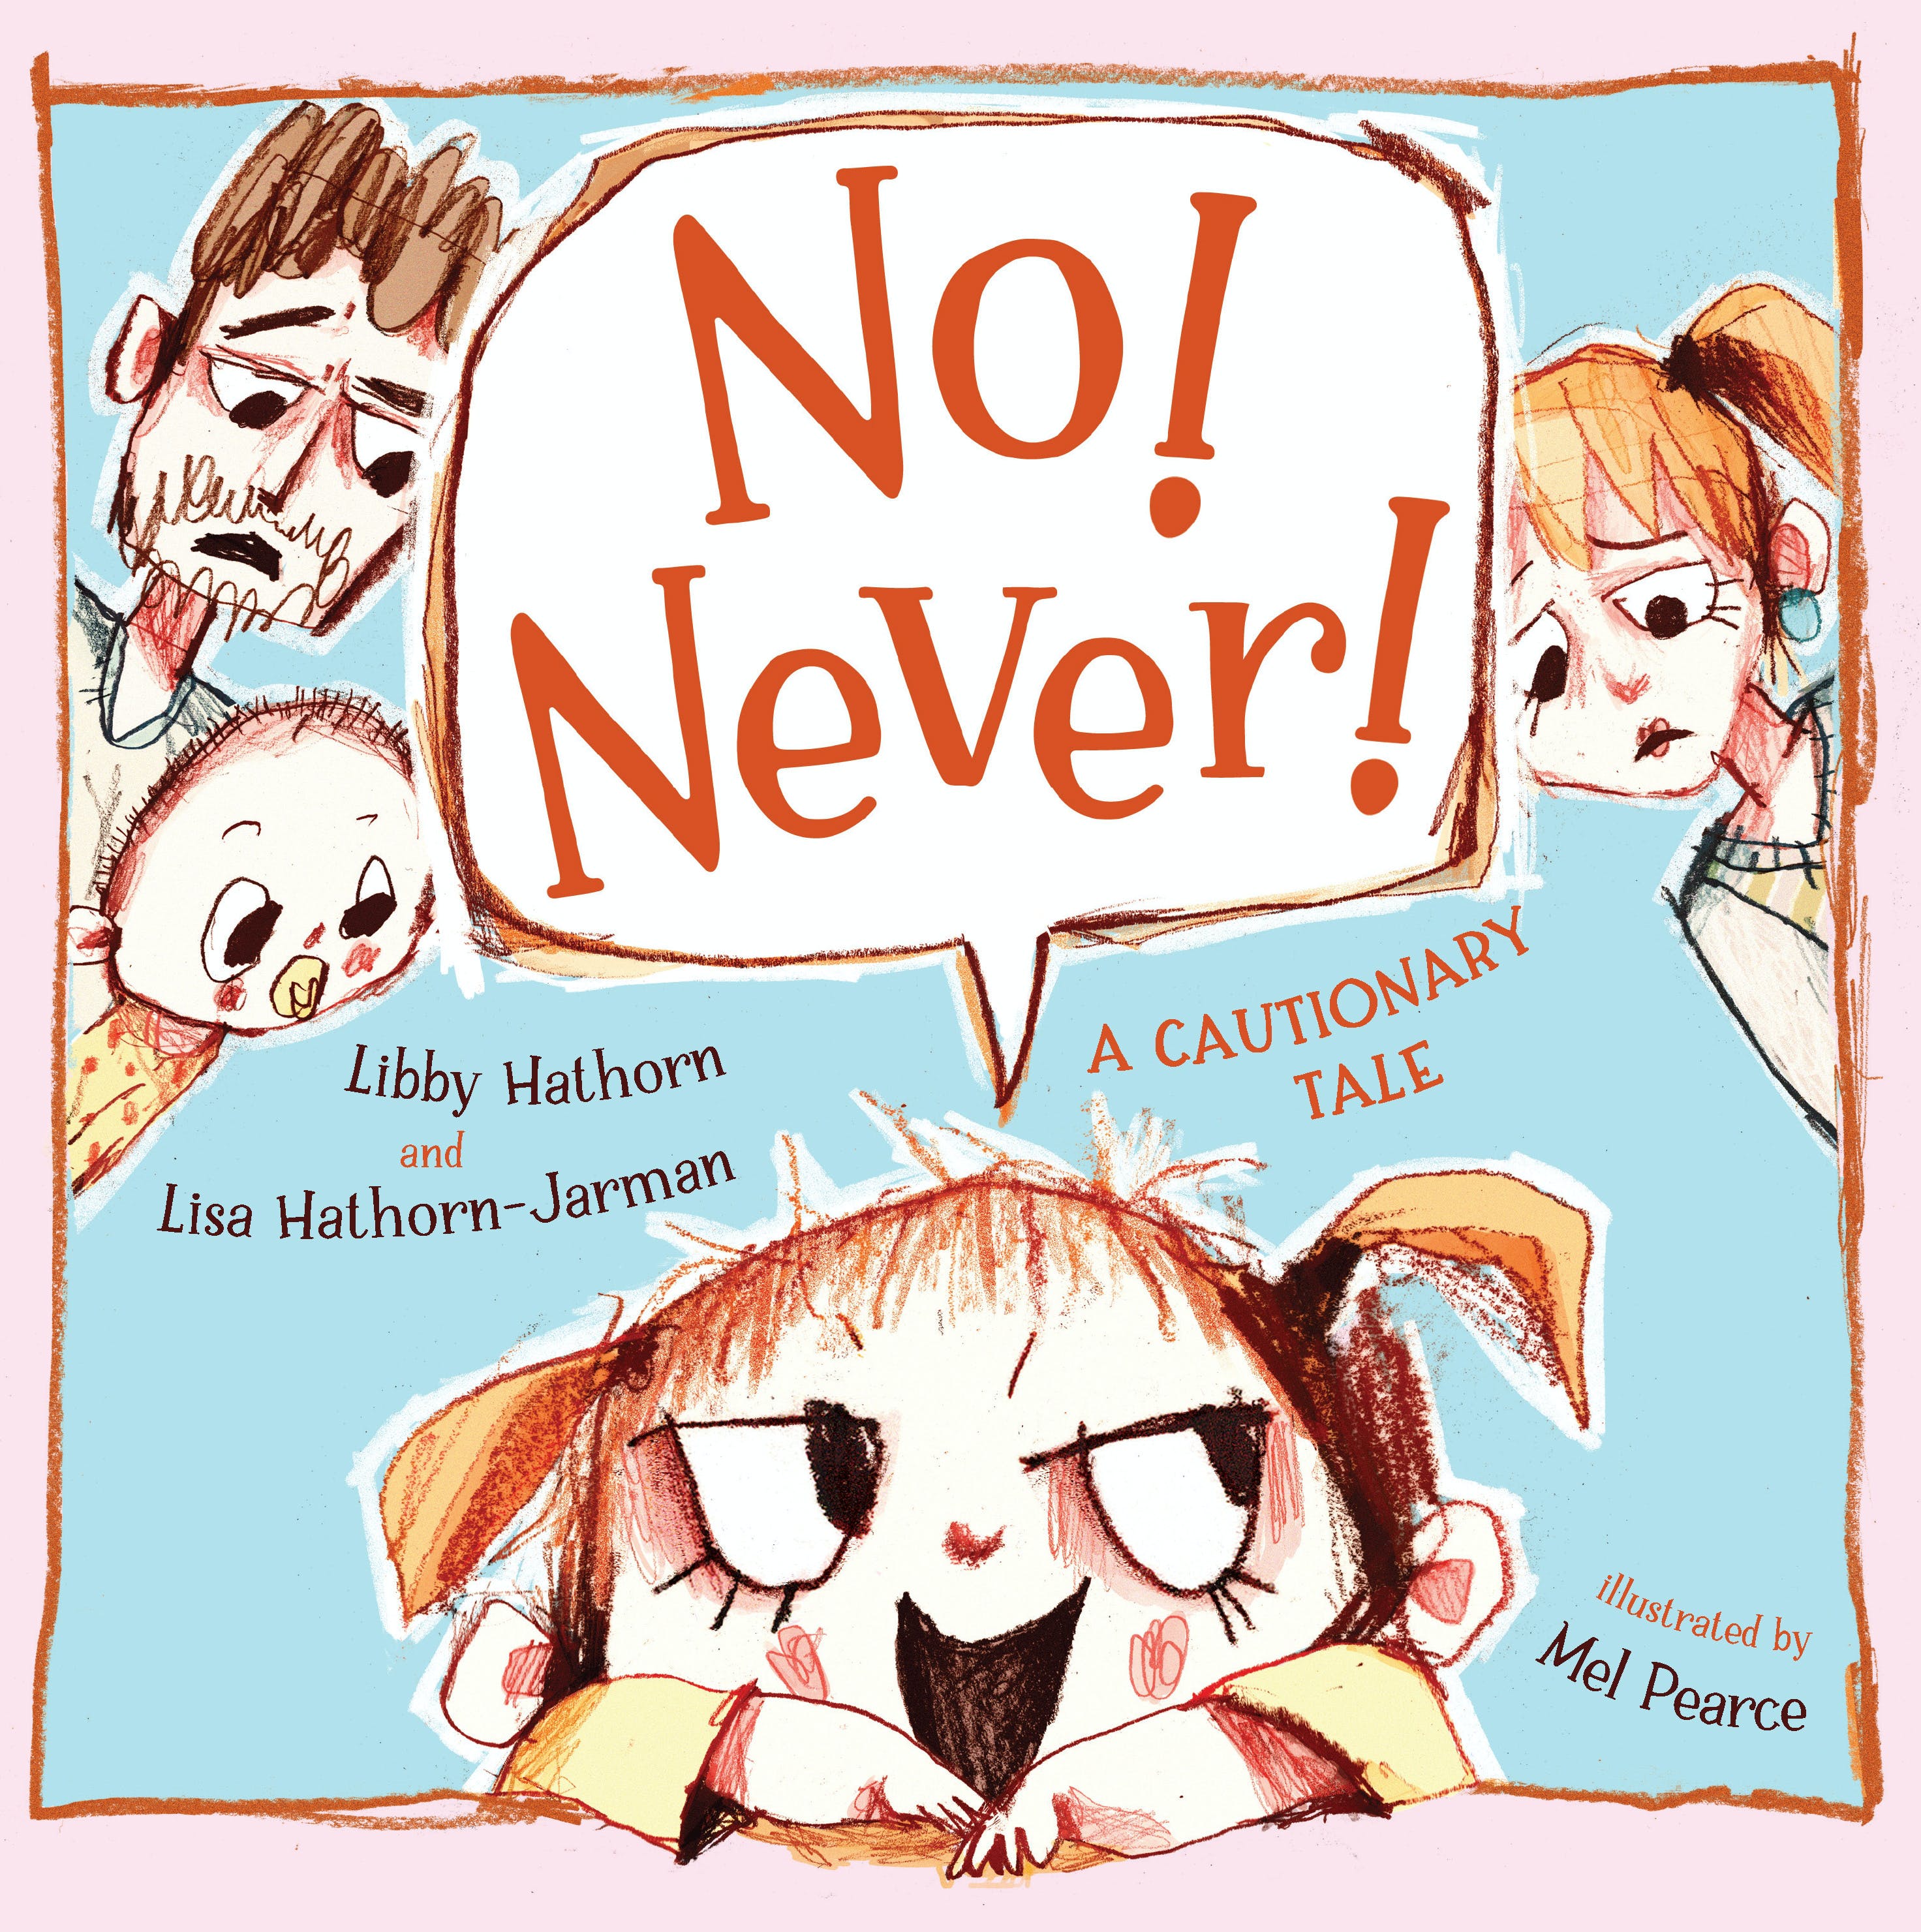 A worried family and mischievous child in the cover of No! Never! A Cautionary Tale